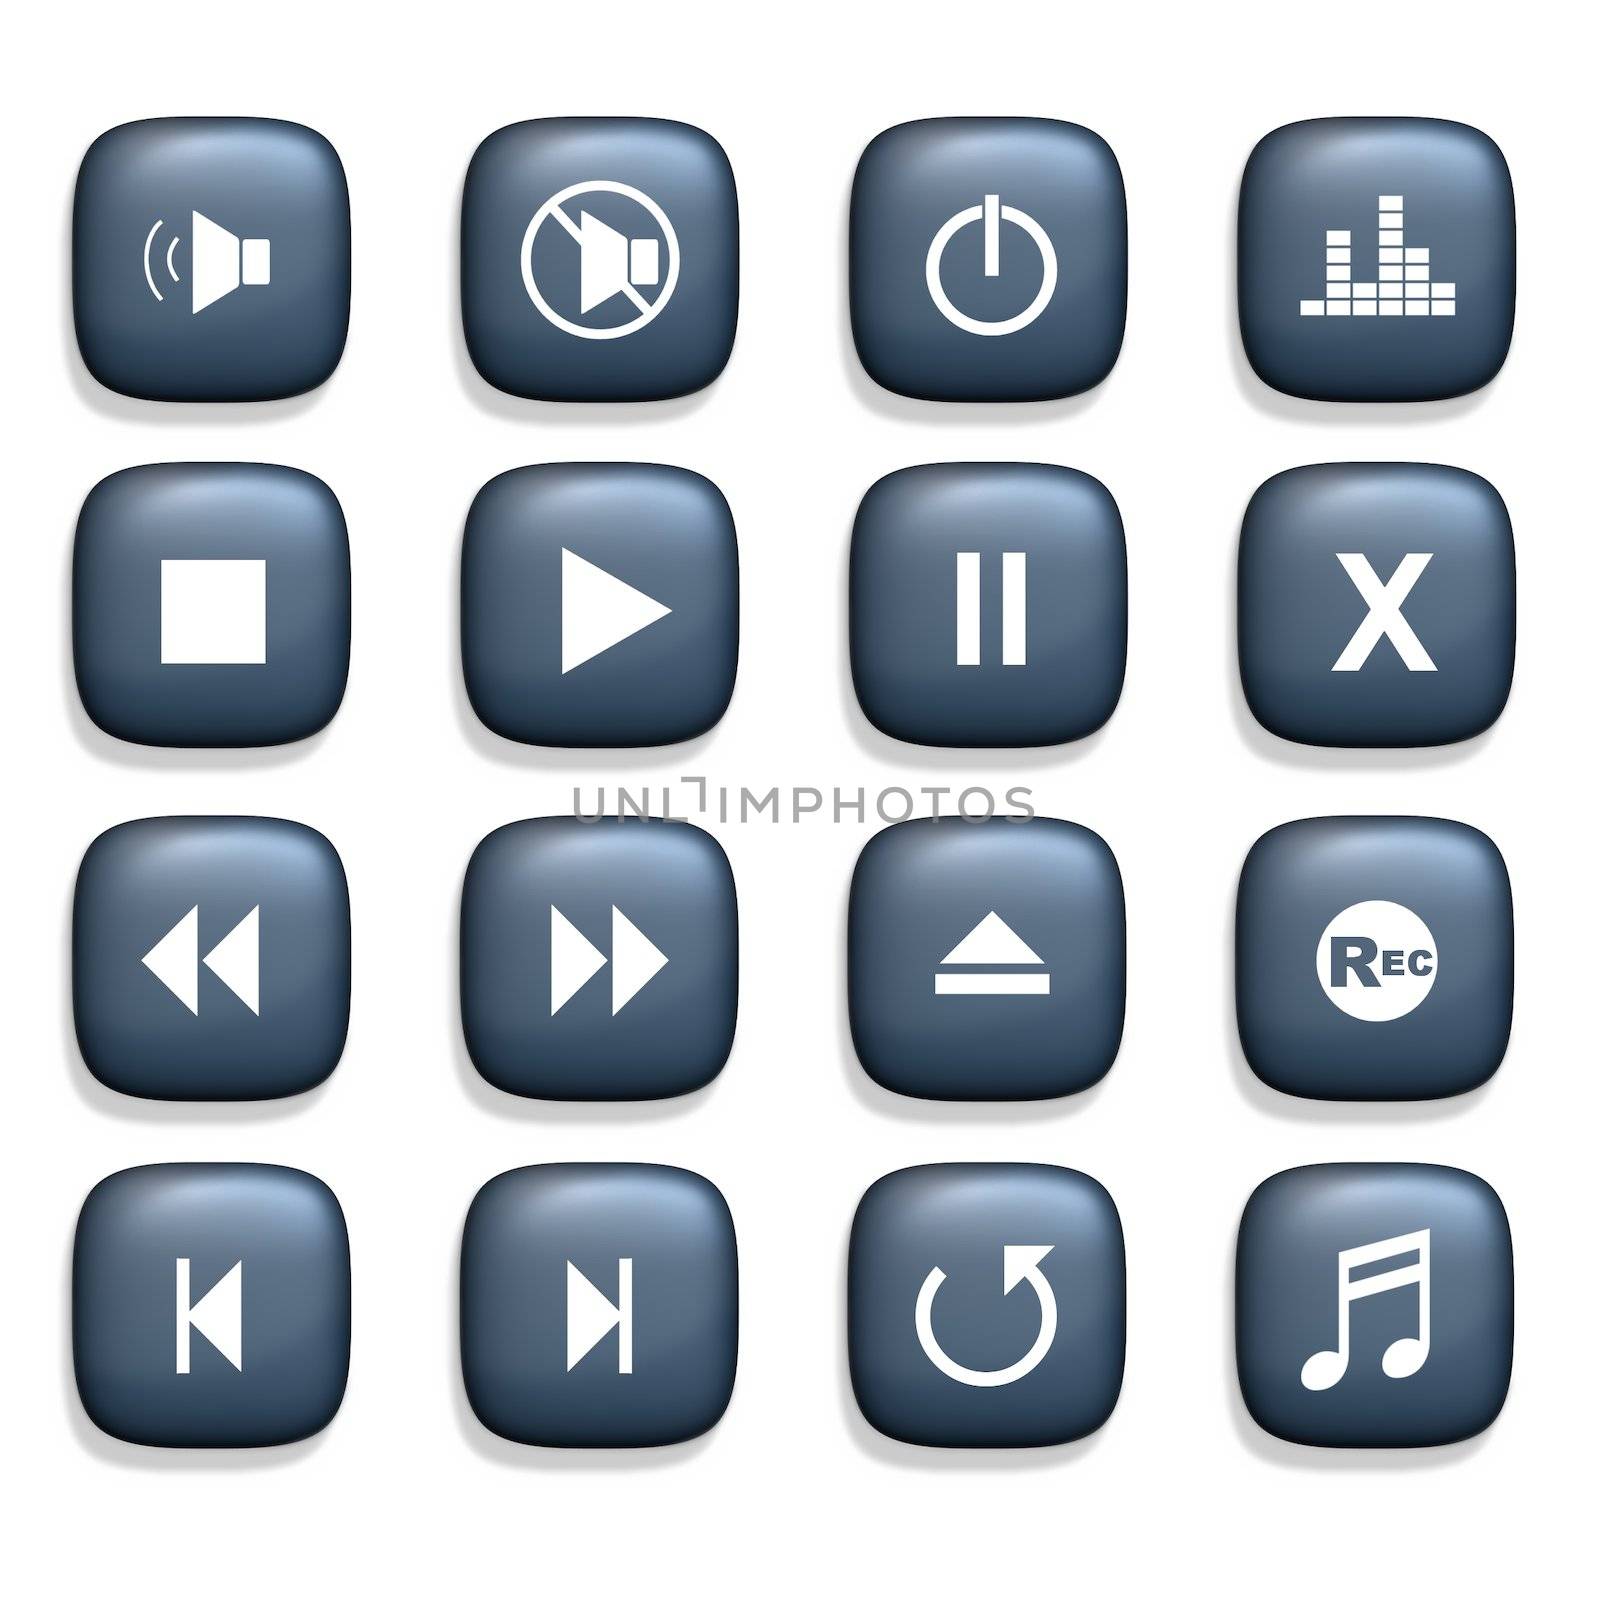 16 Media player icons over a white background
